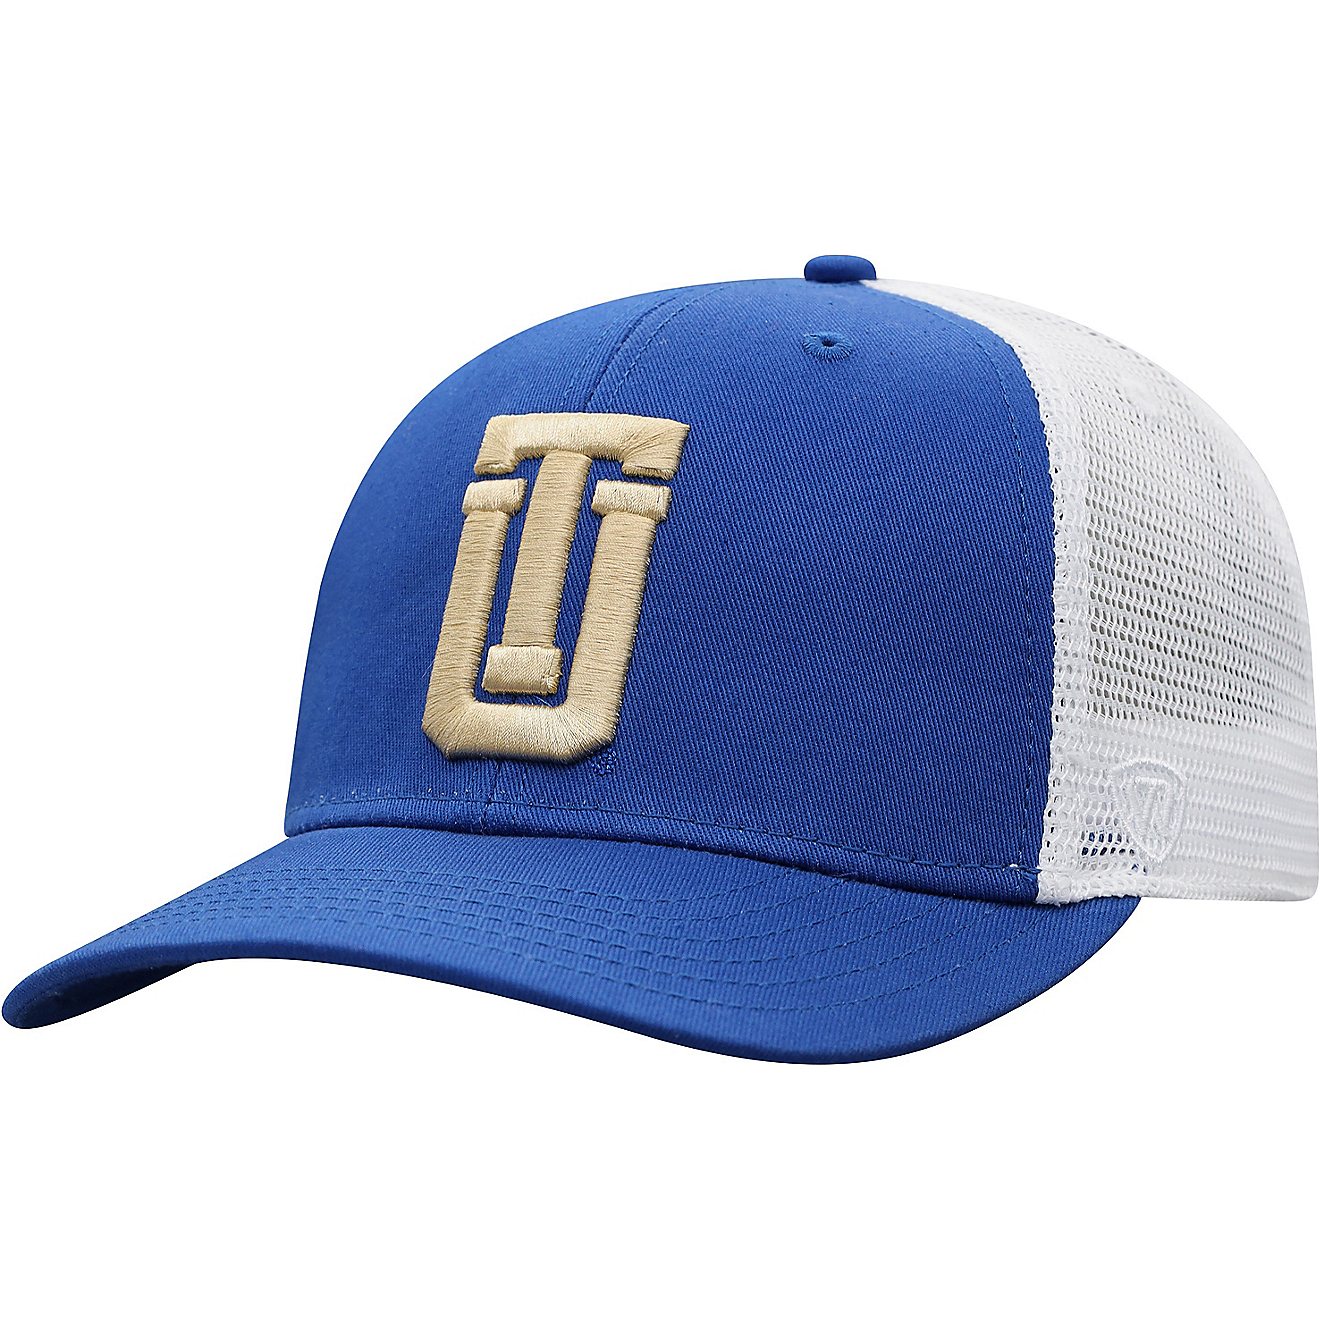 Top of The World Adults' University of Tulsa BB 2-Tone Adjustable Cap                                                            - view number 1